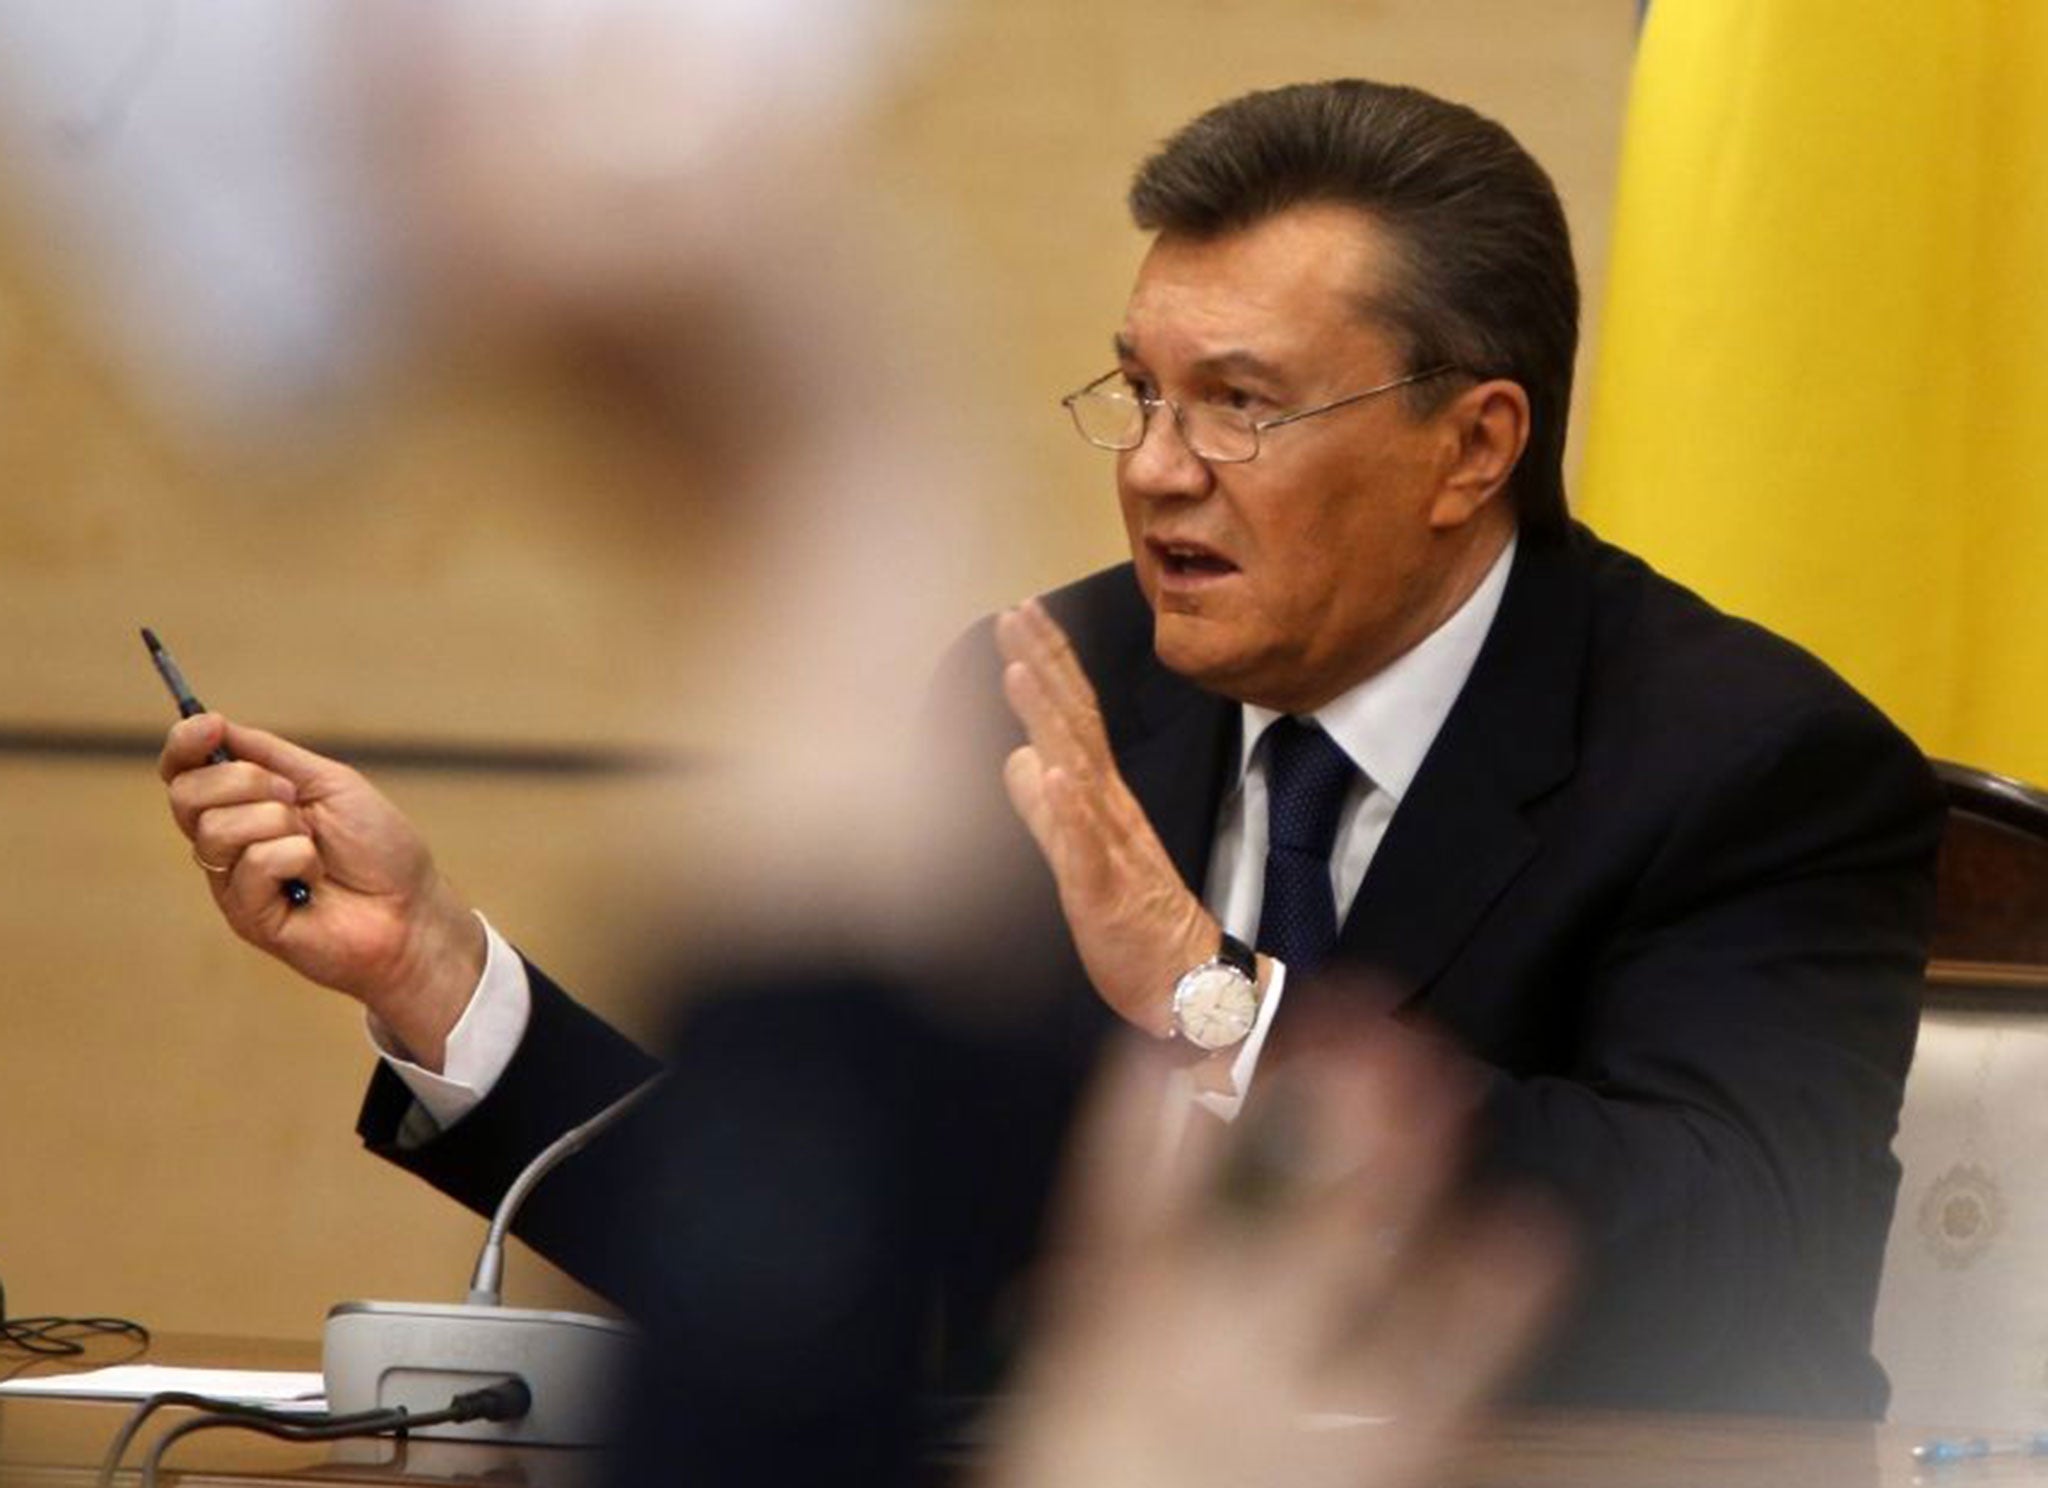 Russia's ambassador to the UN told the council he was authorised to read a statement from Yanukovych (pictured) requesting Russian President Vladimir Putin to use his armed forces to restore peace and defend the people of Ukraine